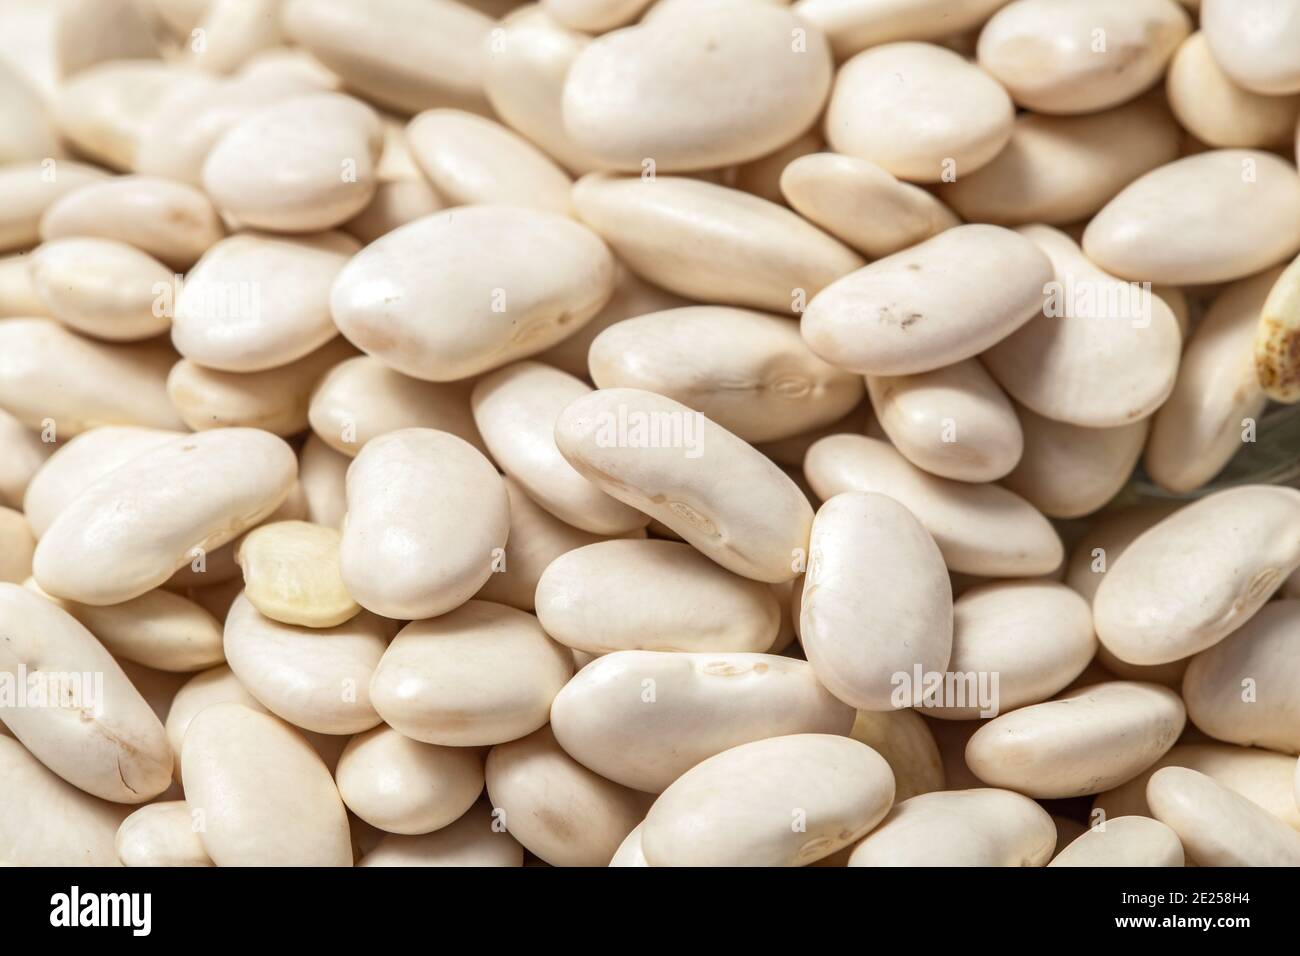 Pile of big ripe white kidney beans on the table before cooking. Stock Photo